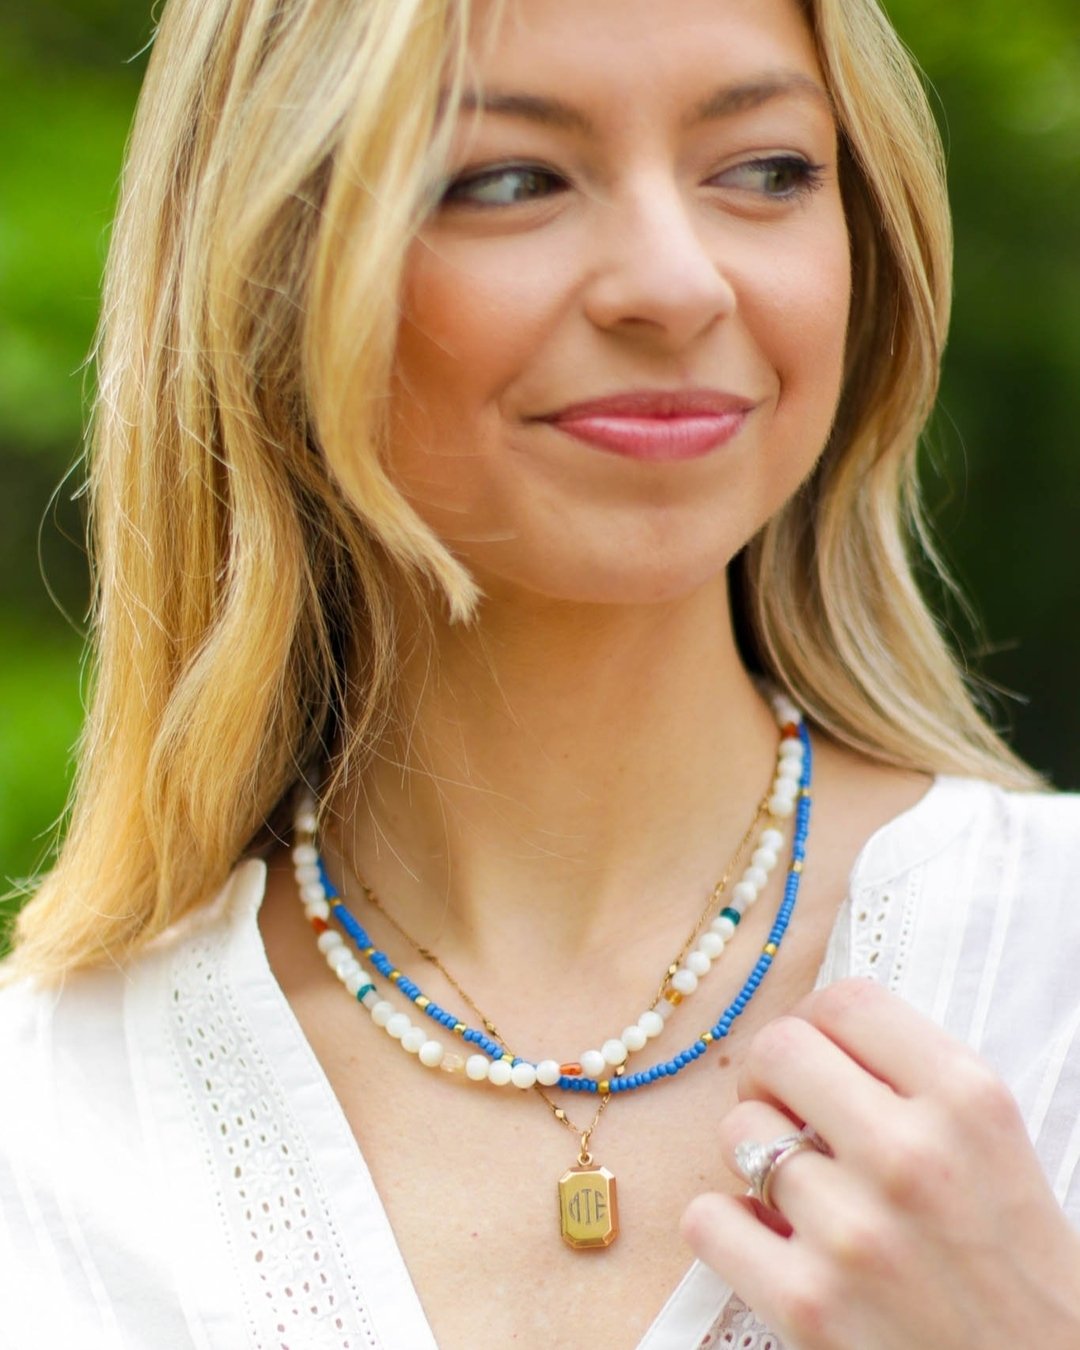 Add some life to the layers with cool tones for the season.
Semi precious stones like citrine, carnelian, apatite, and moonstone add an eclectic mix to a strand of mother of pearl in our Esther necklace. Vintage seed beads of blue and green add light